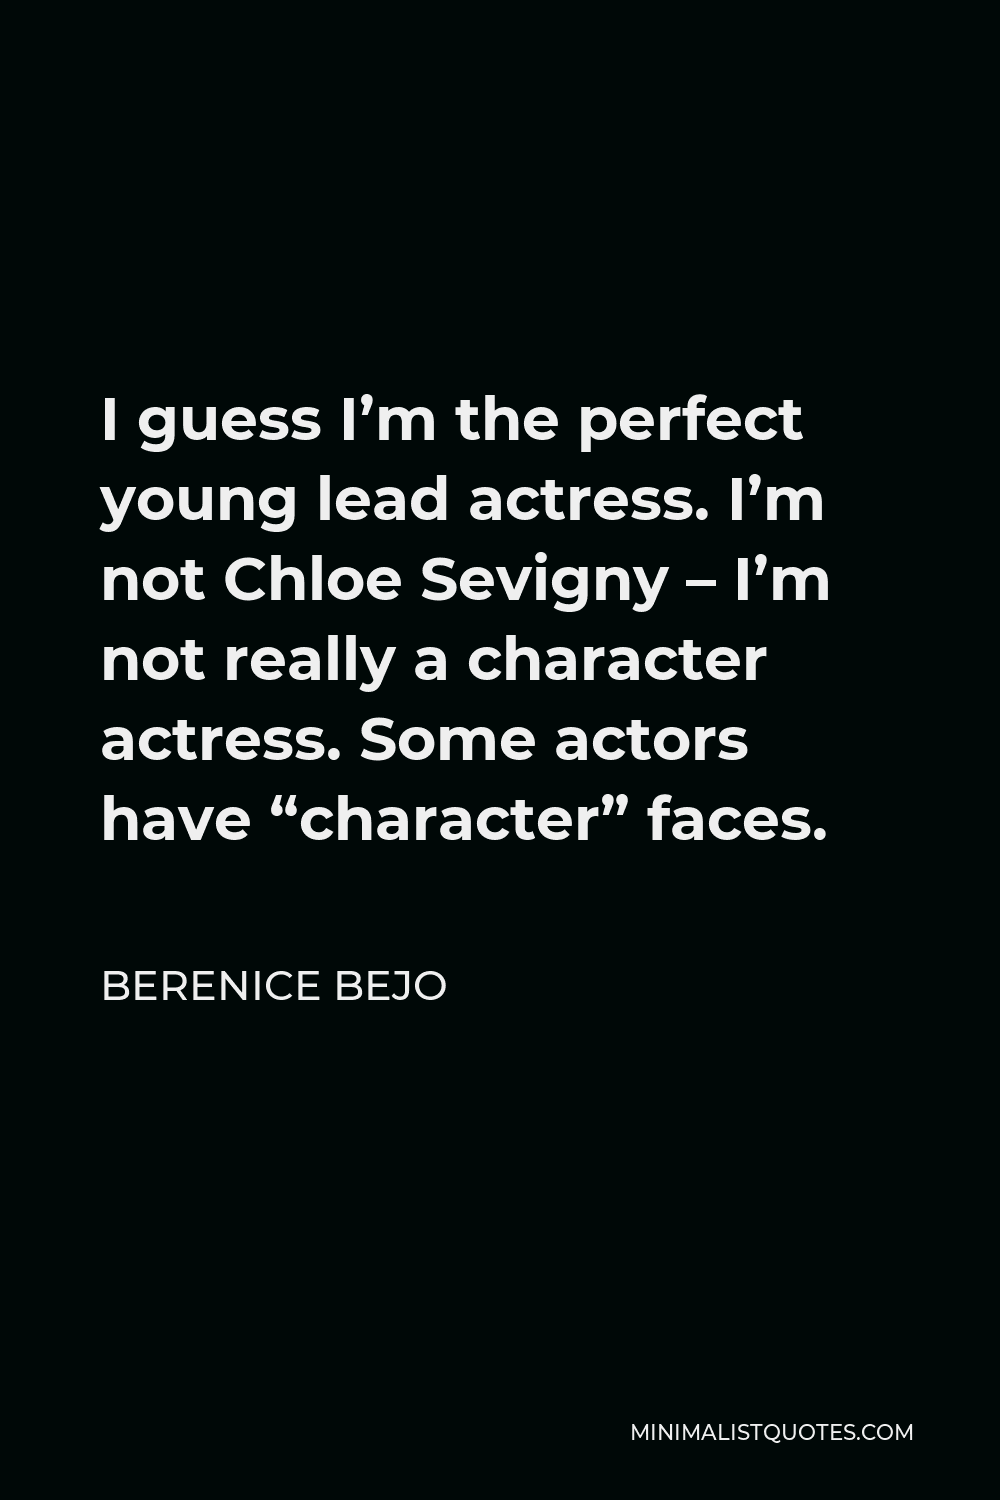 Berenice Bejo Quote - I guess I’m the perfect young lead actress. I’m not Chloe Sevigny – I’m not really a character actress. Some actors have “character” faces.